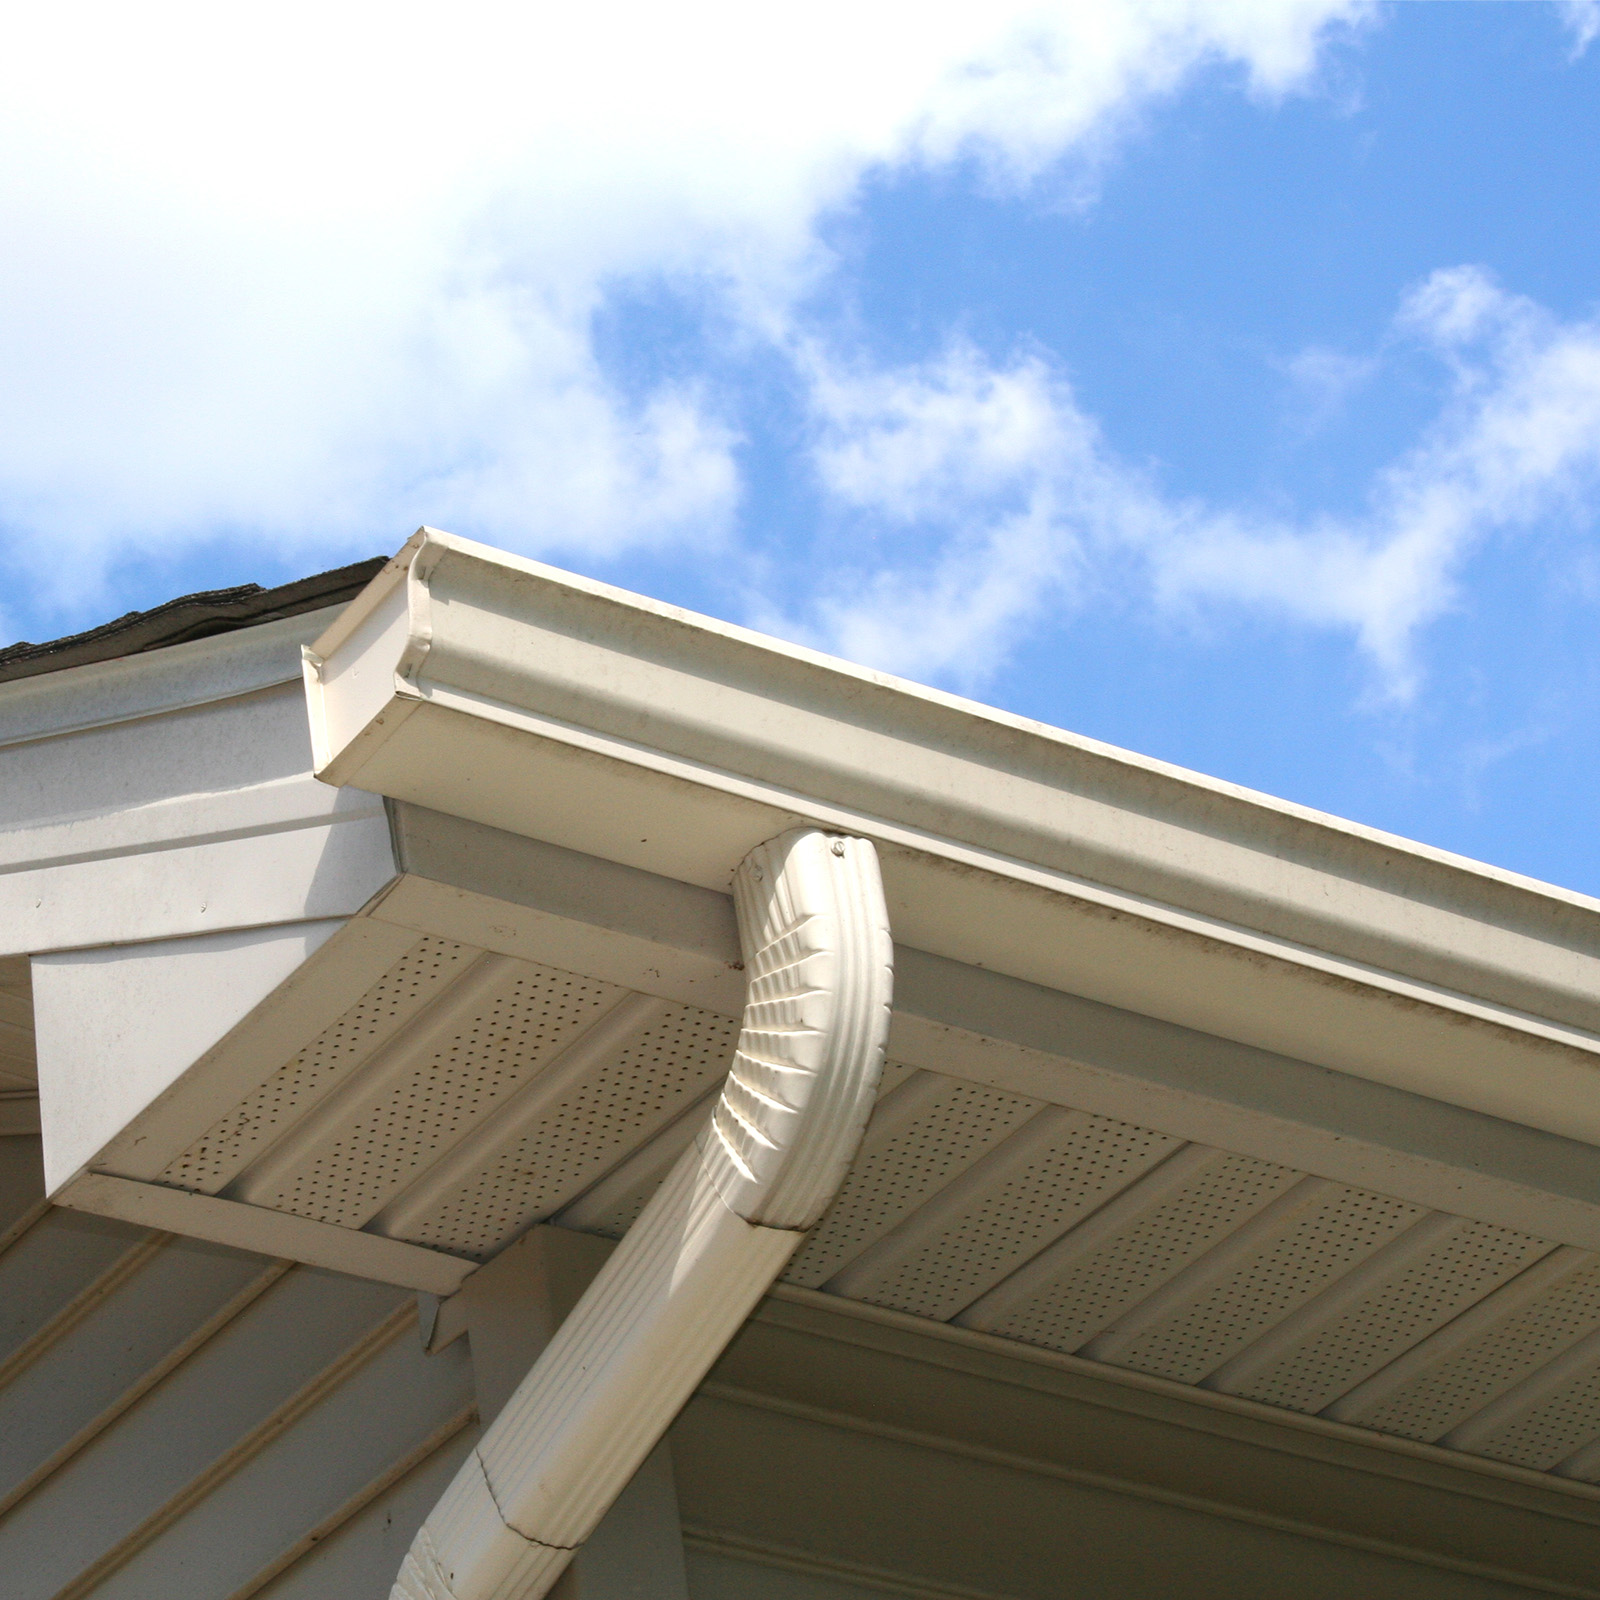 House Gutter and Downspout with Sky